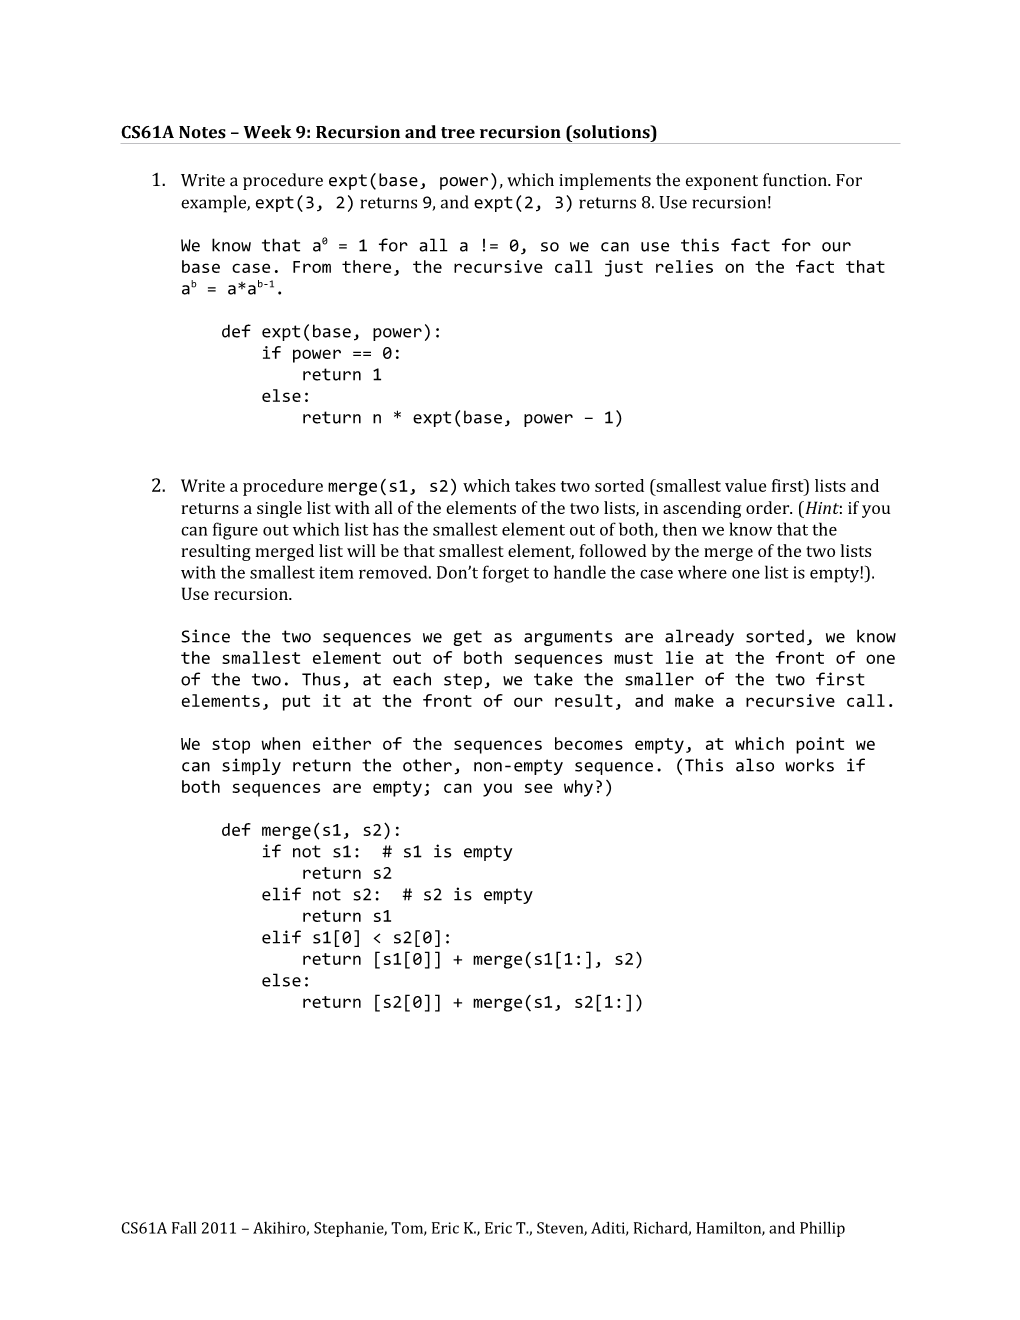 CS61A Notes Week 9: Recursion and Tree Recursion (Solutions)